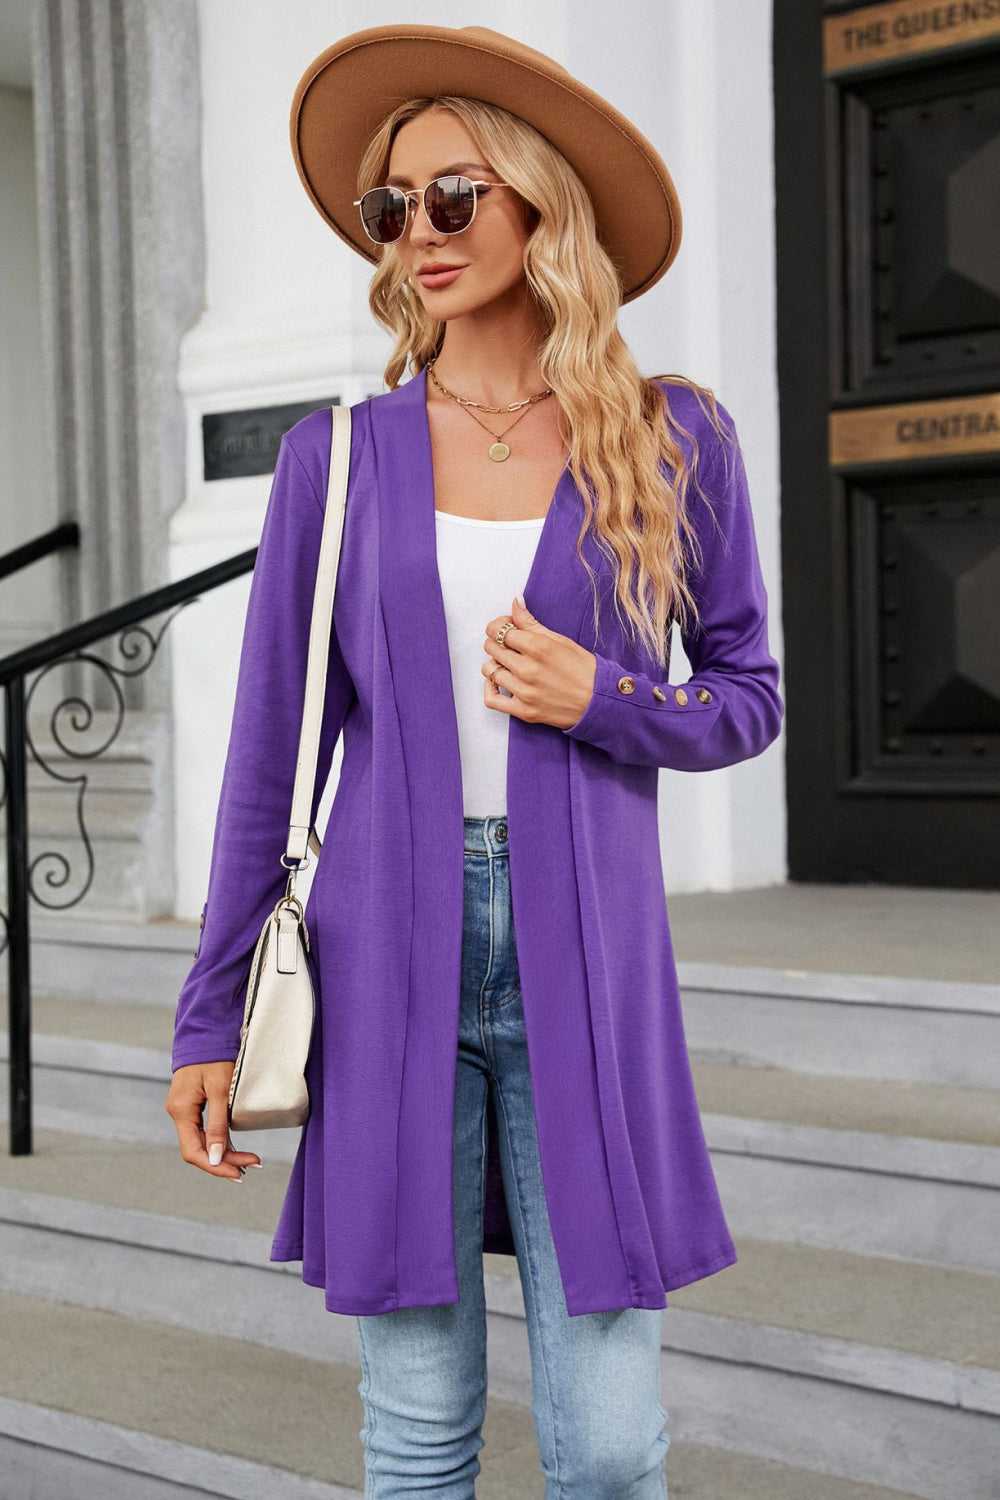 Long Sleeve Open Front Cardigan - Purple / S - Women’s Clothing & Accessories - Shirts & Tops - 1 - 2024